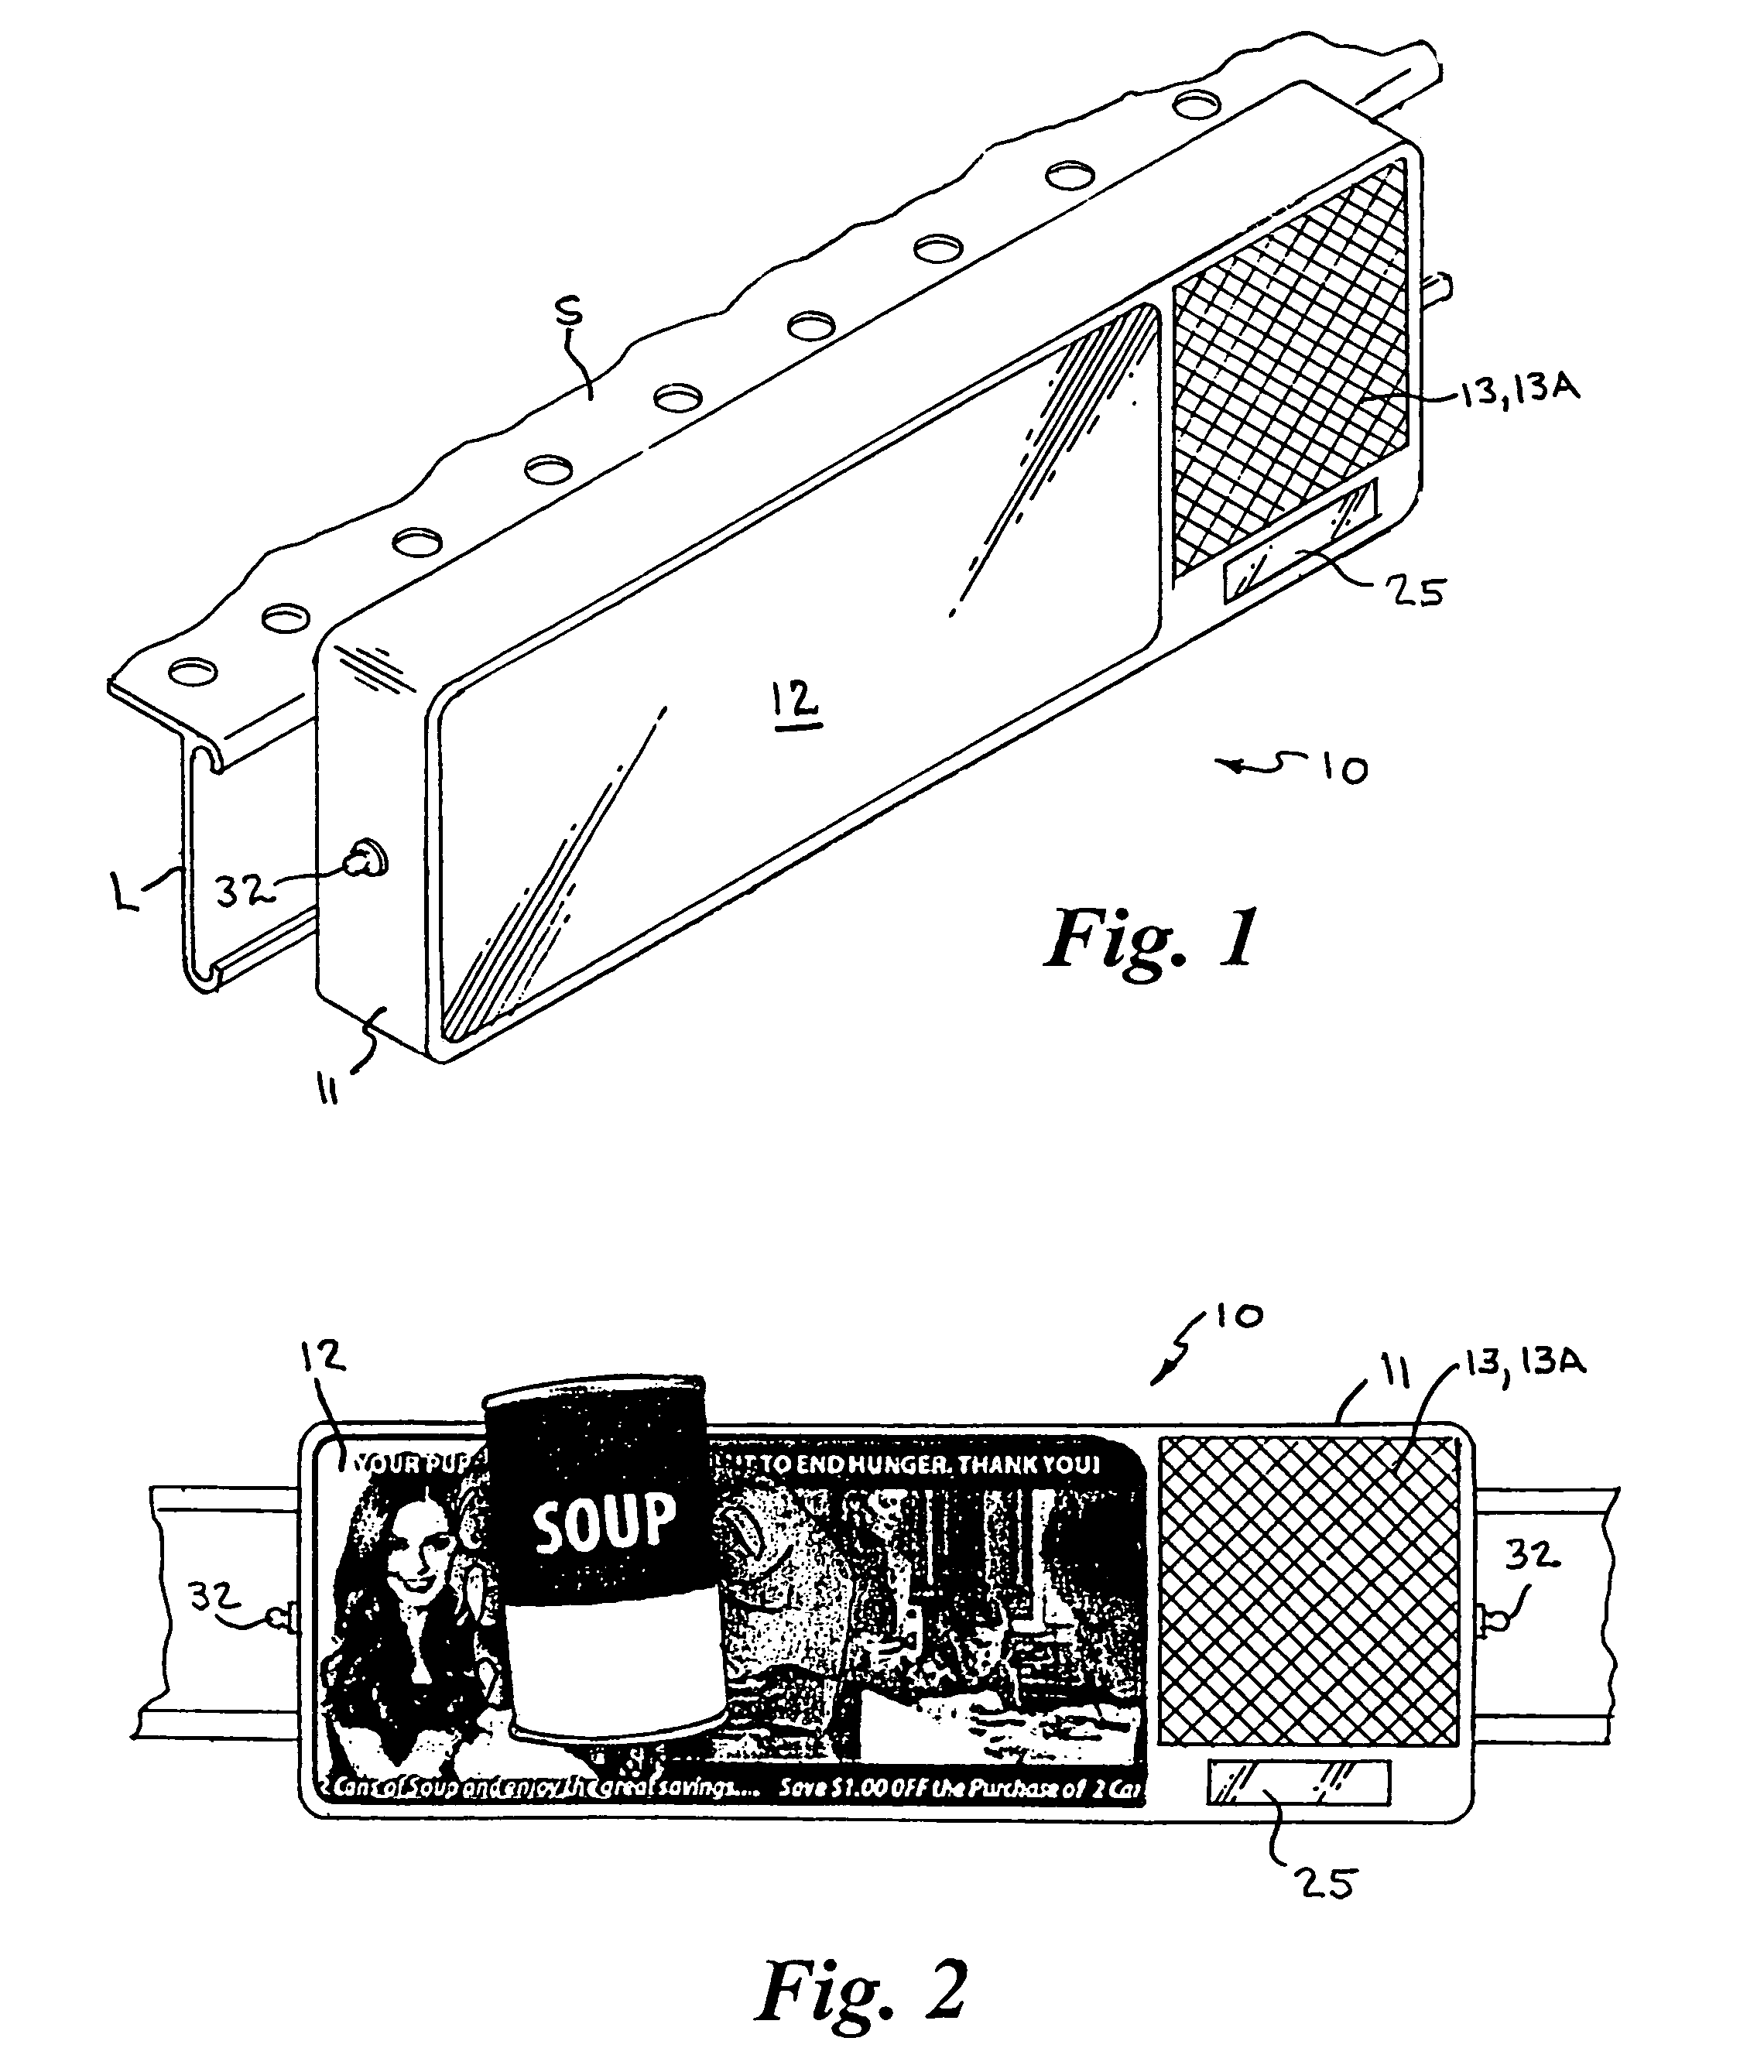 Glasses-free 3D advertising system and method